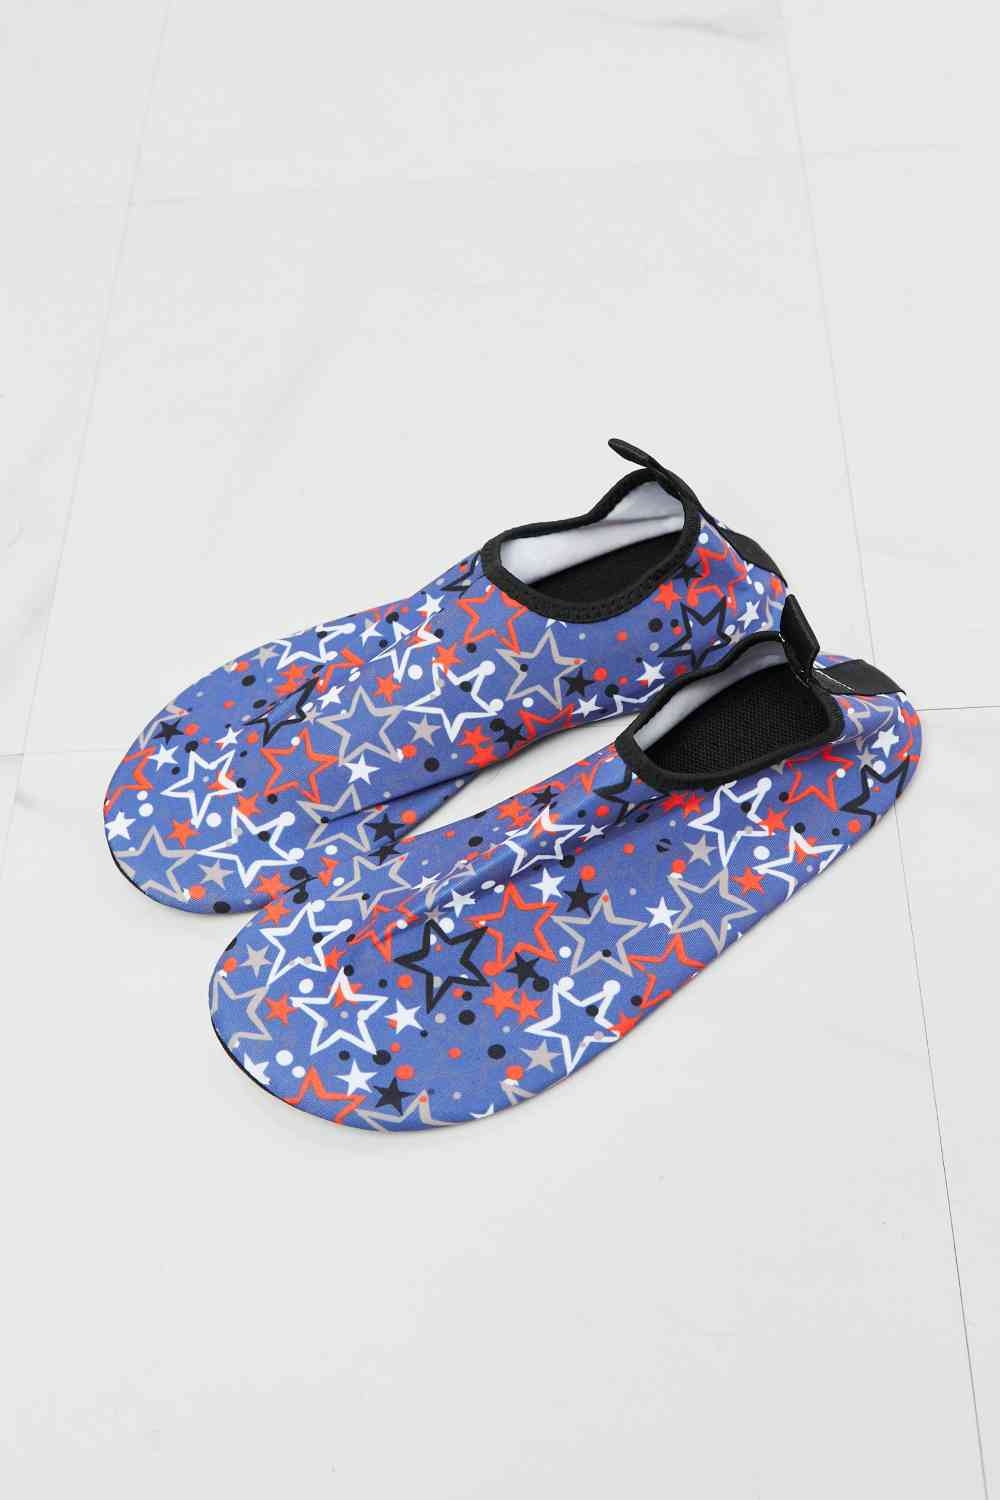 On The Shore Water Shoes in Navy - Accessories - Shoes - 6 - 2024